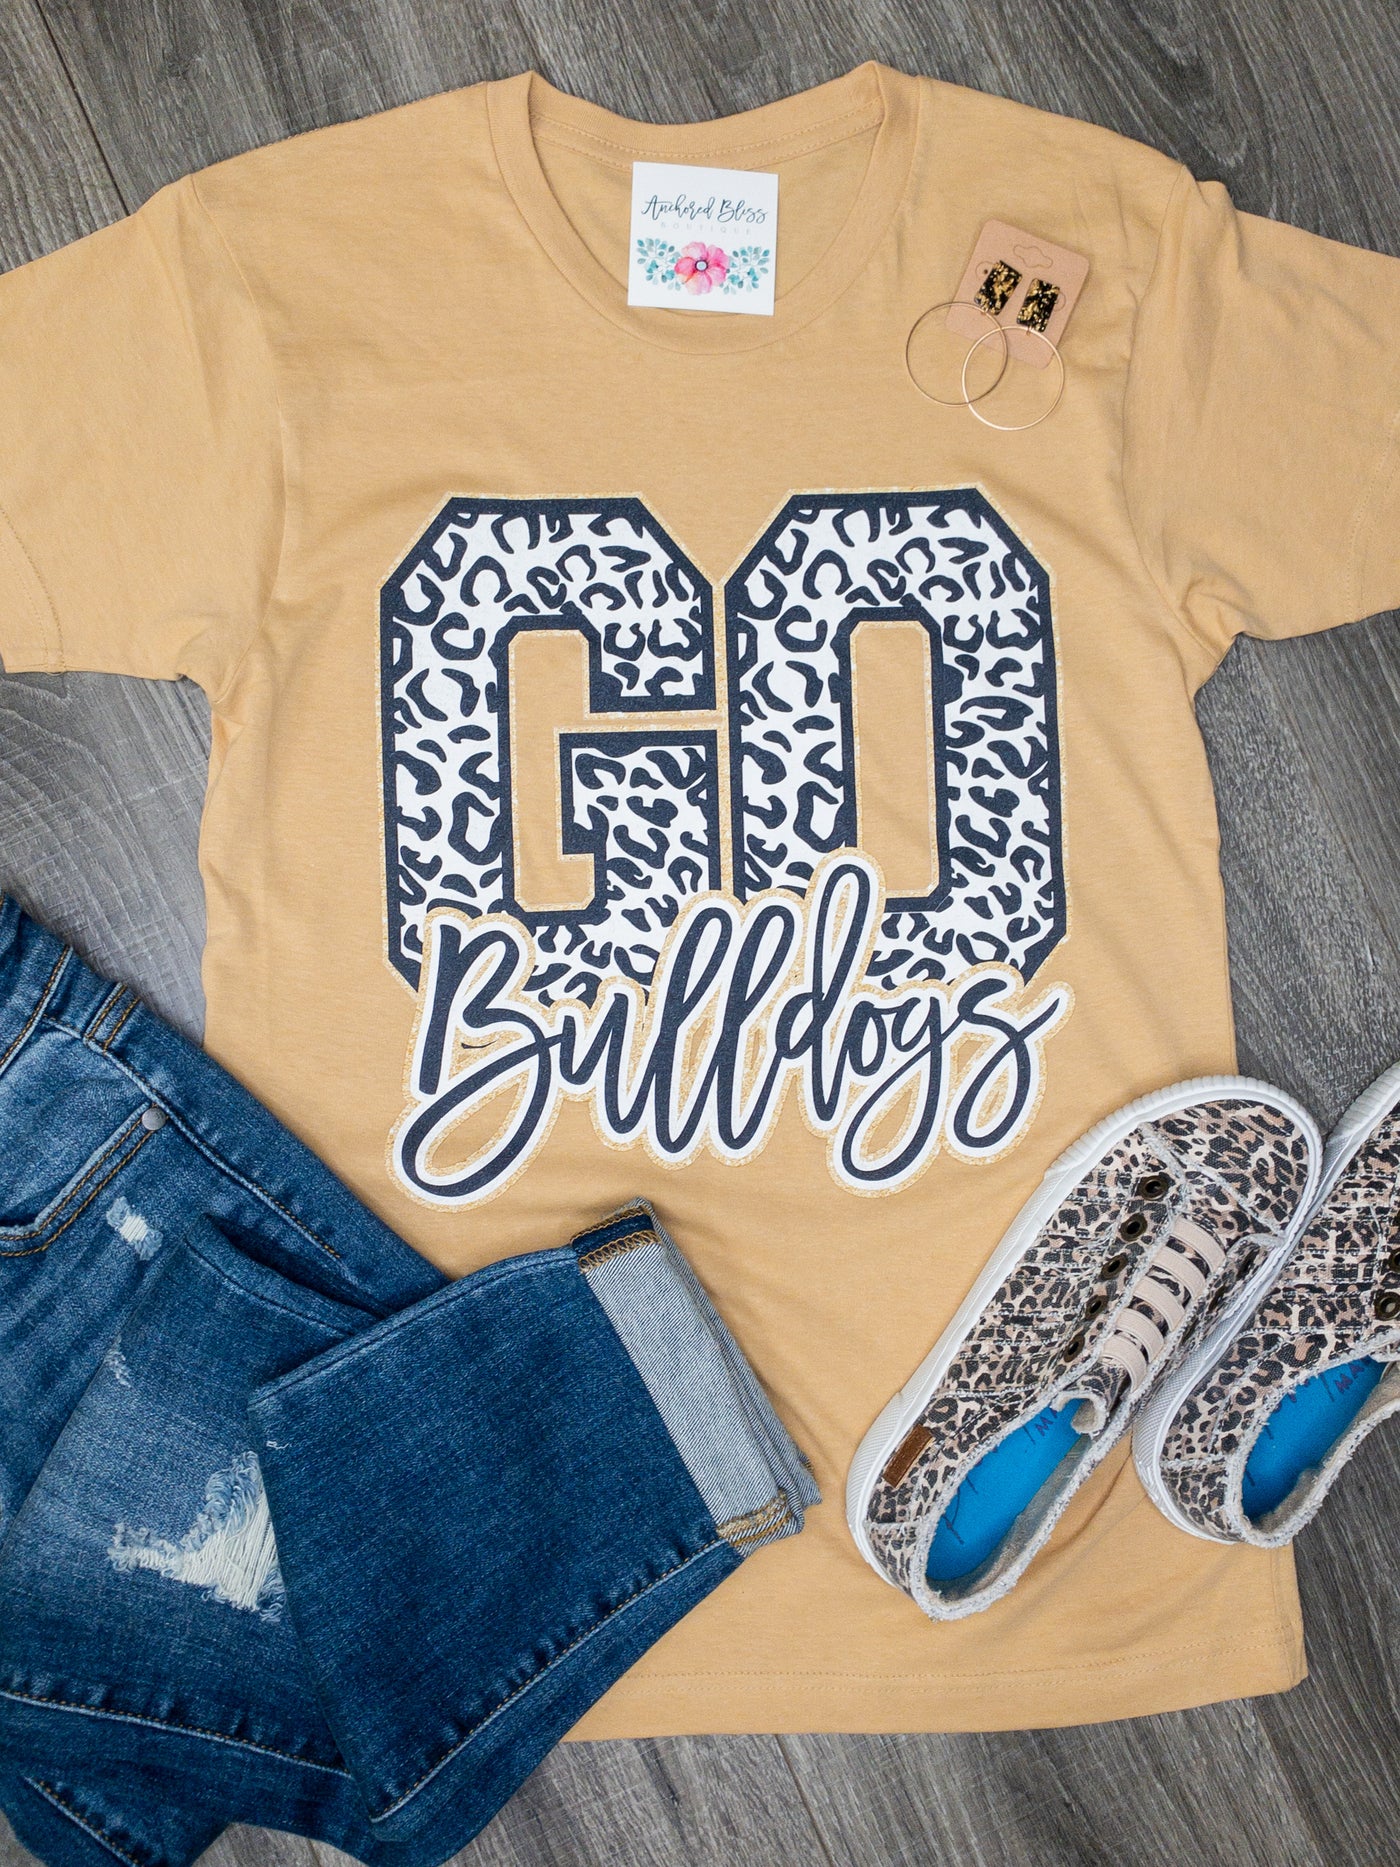 Go Bulldogs Graphic Tee-Harps & Oli-Shop Anchored Bliss Women's Boutique Clothing Store